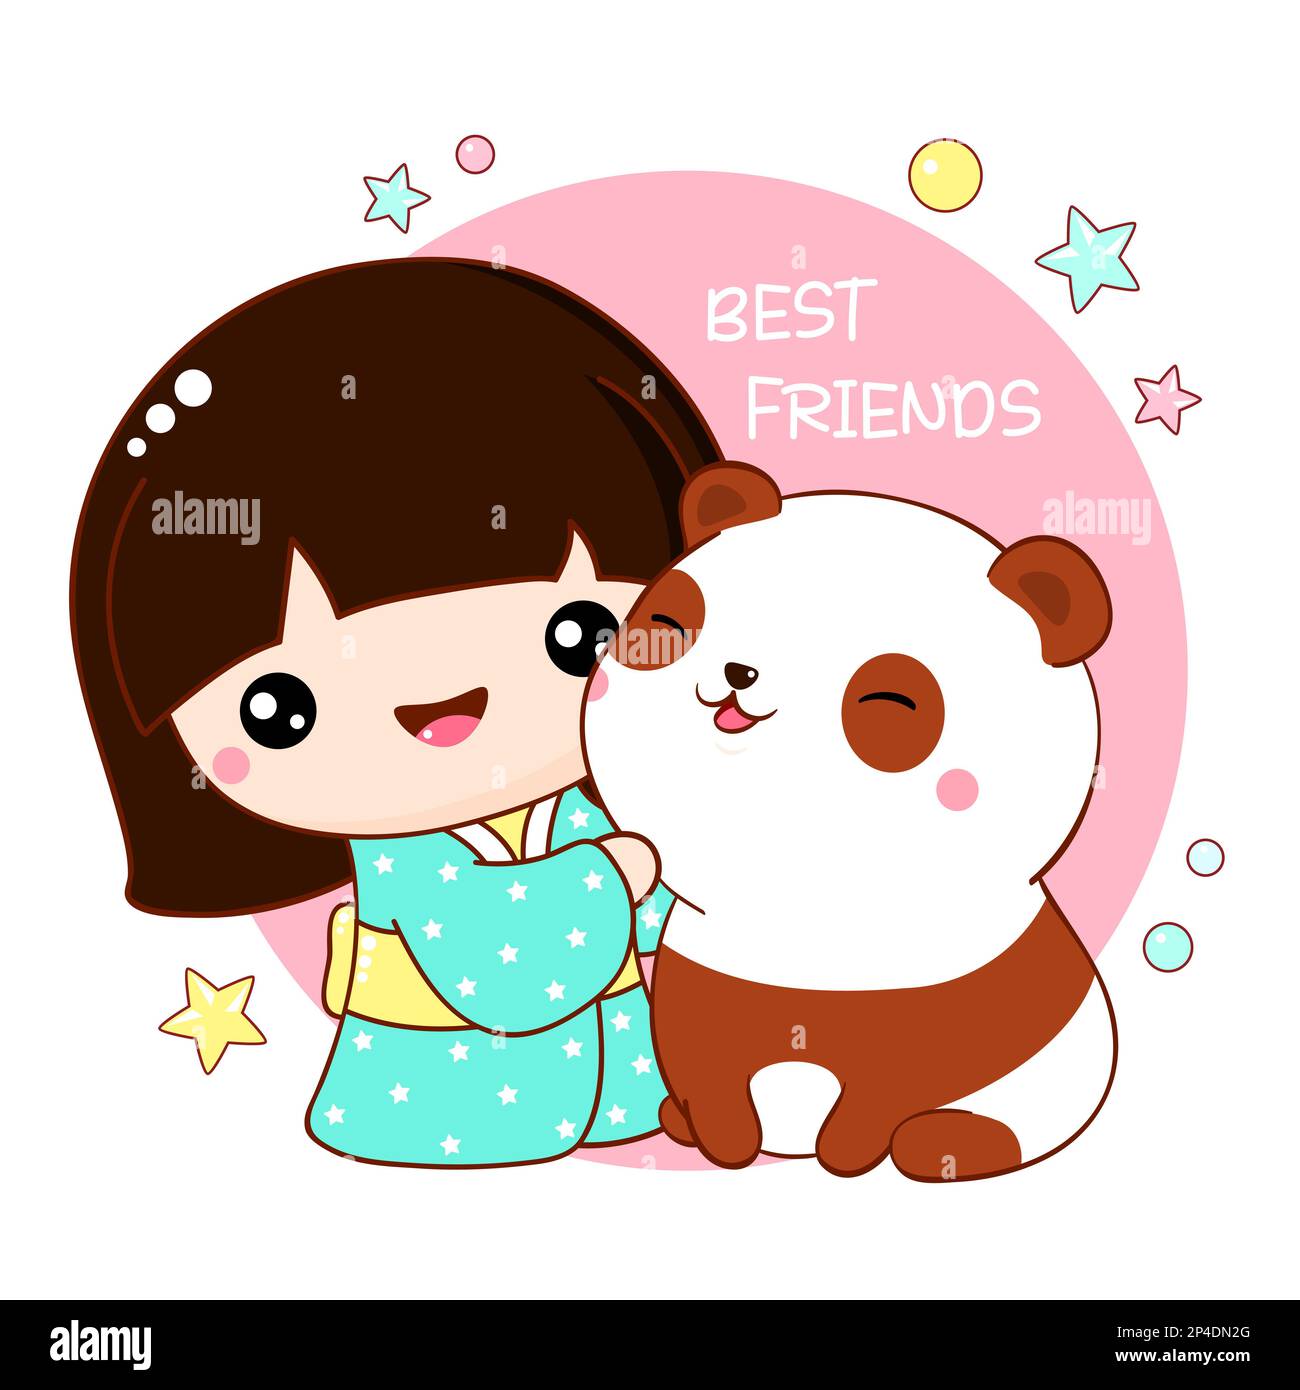 Best friend japanese Cut Out Stock Images & Pictures - Alamy